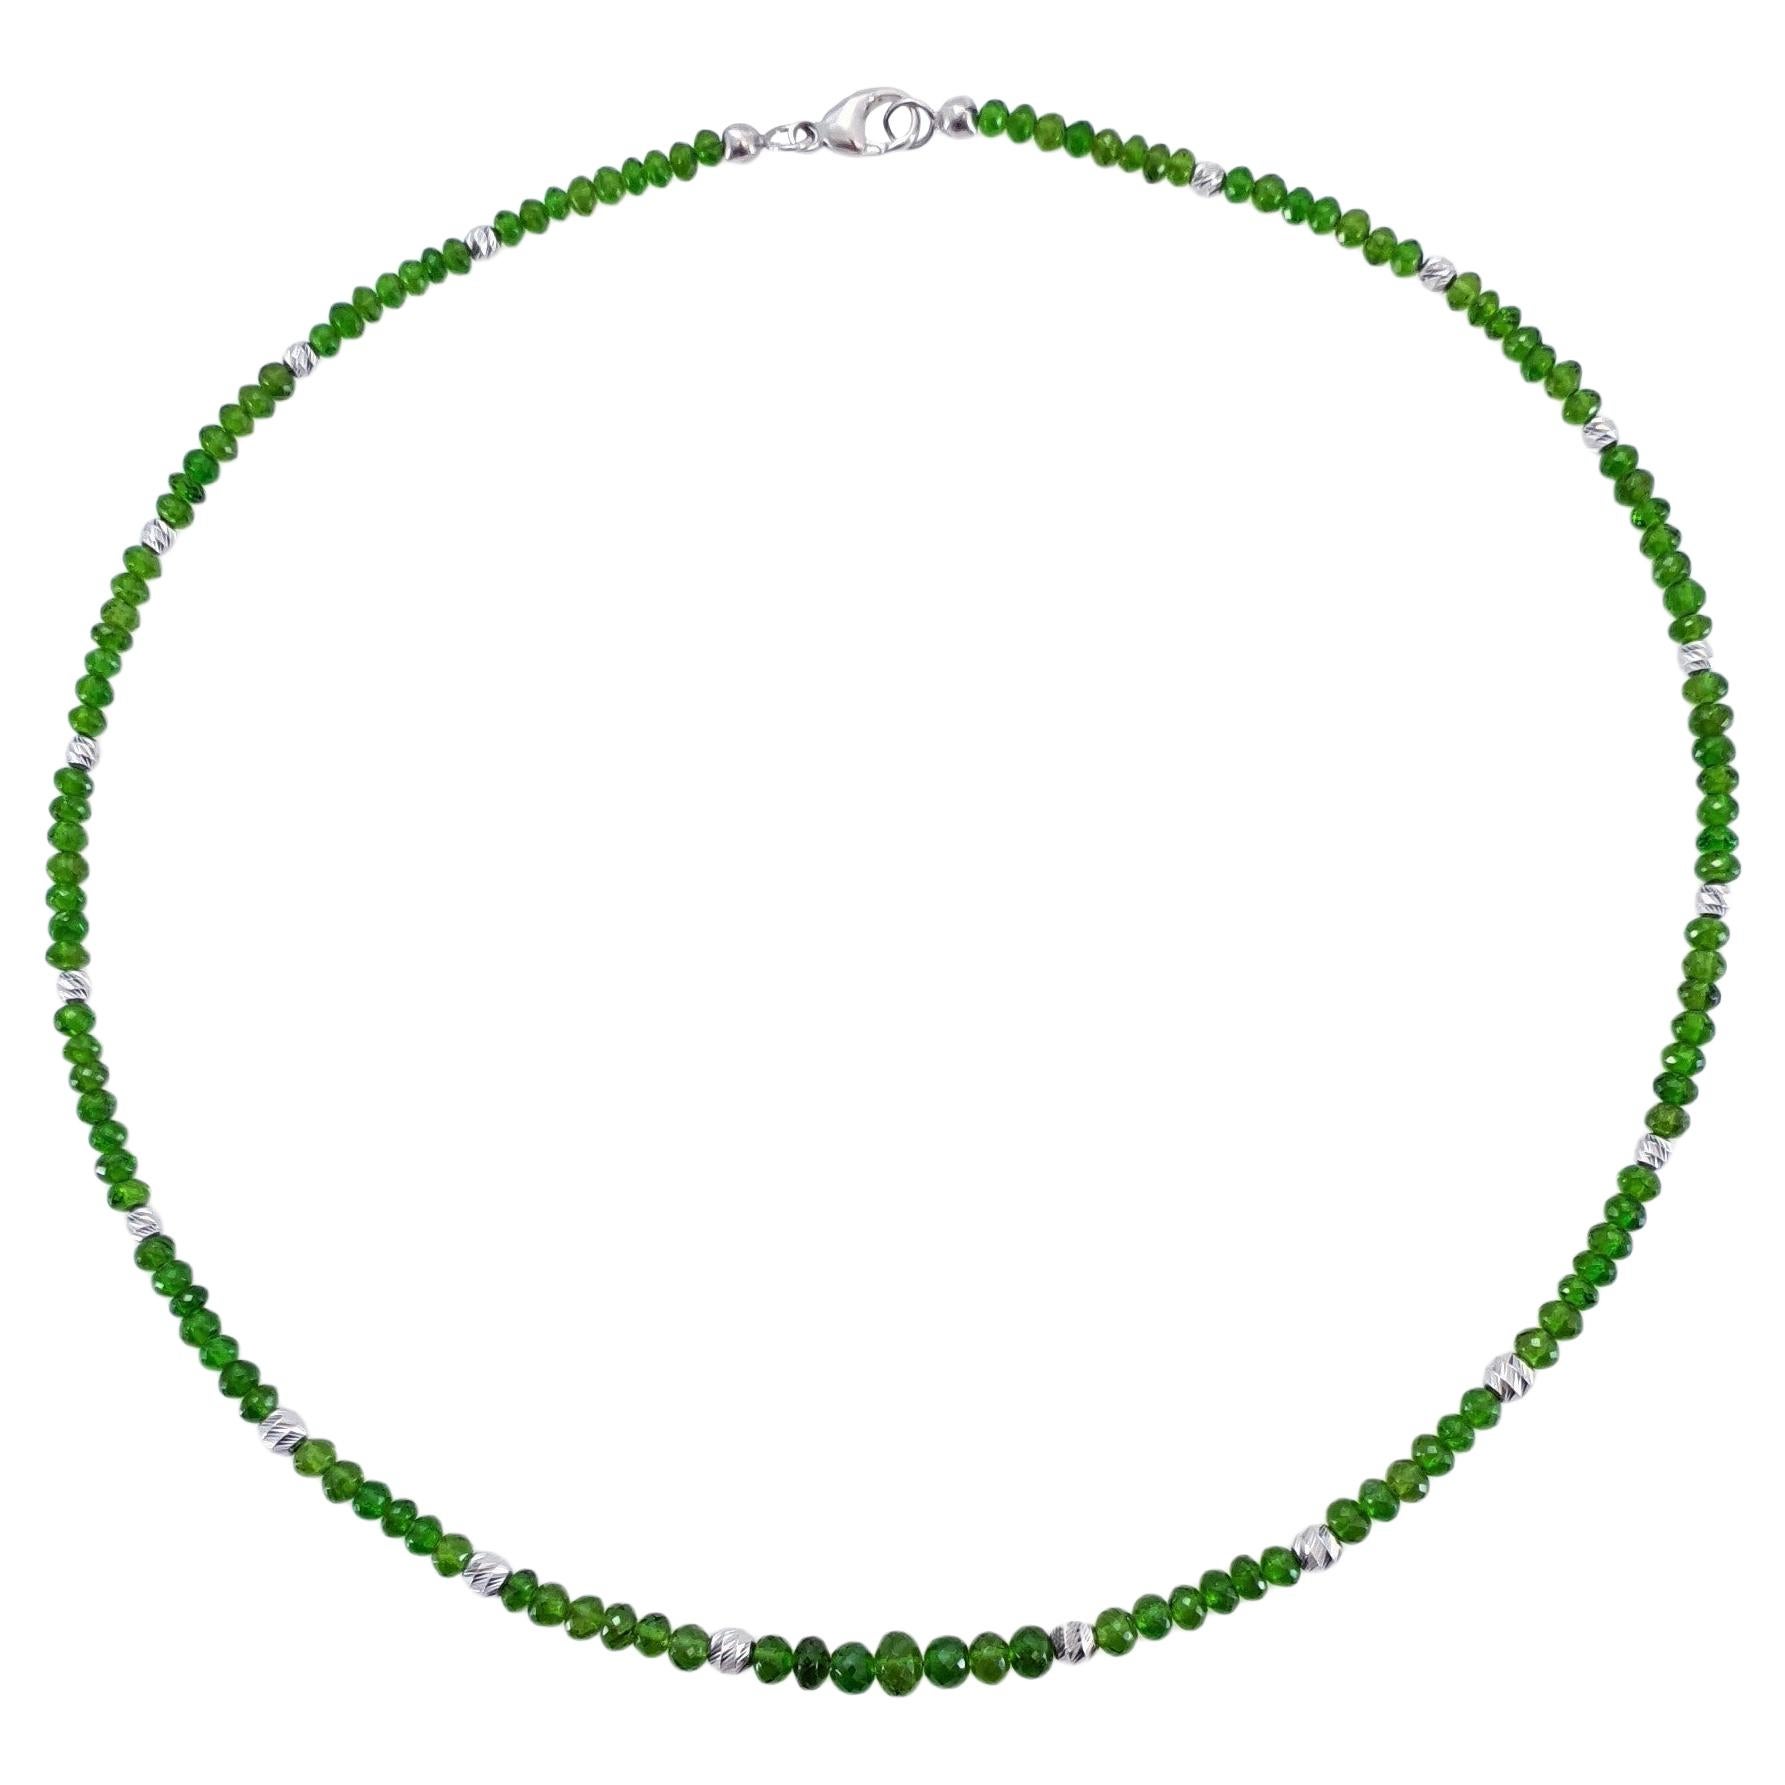 Emerald Green Chromium Diopside Rondel Beaded Necklace with 18 Carat white Gold